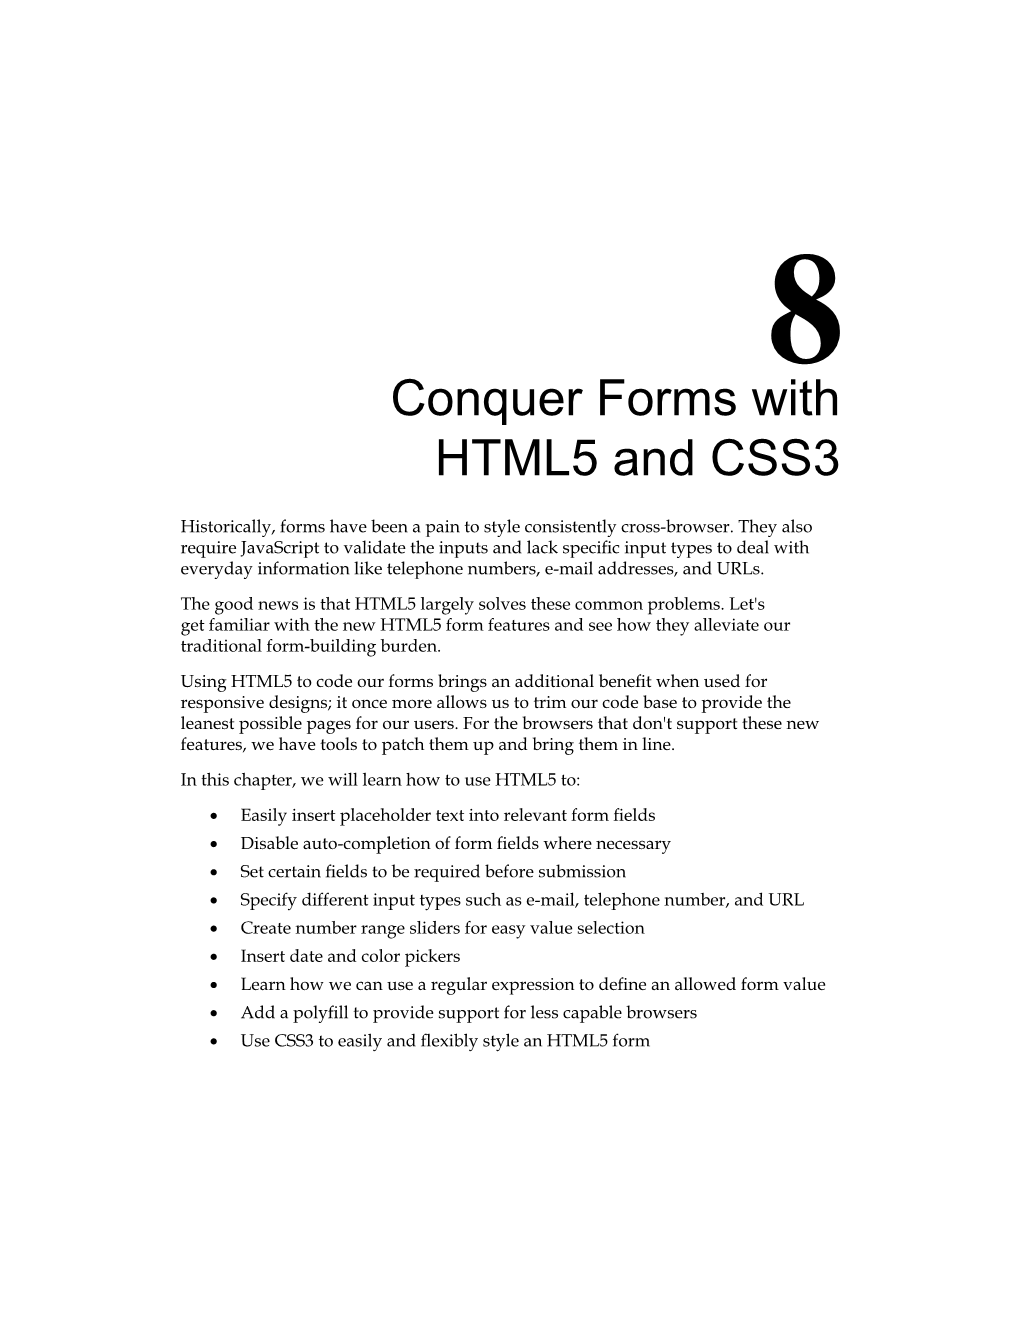 Conquer Forms with HTML5 and CSS3